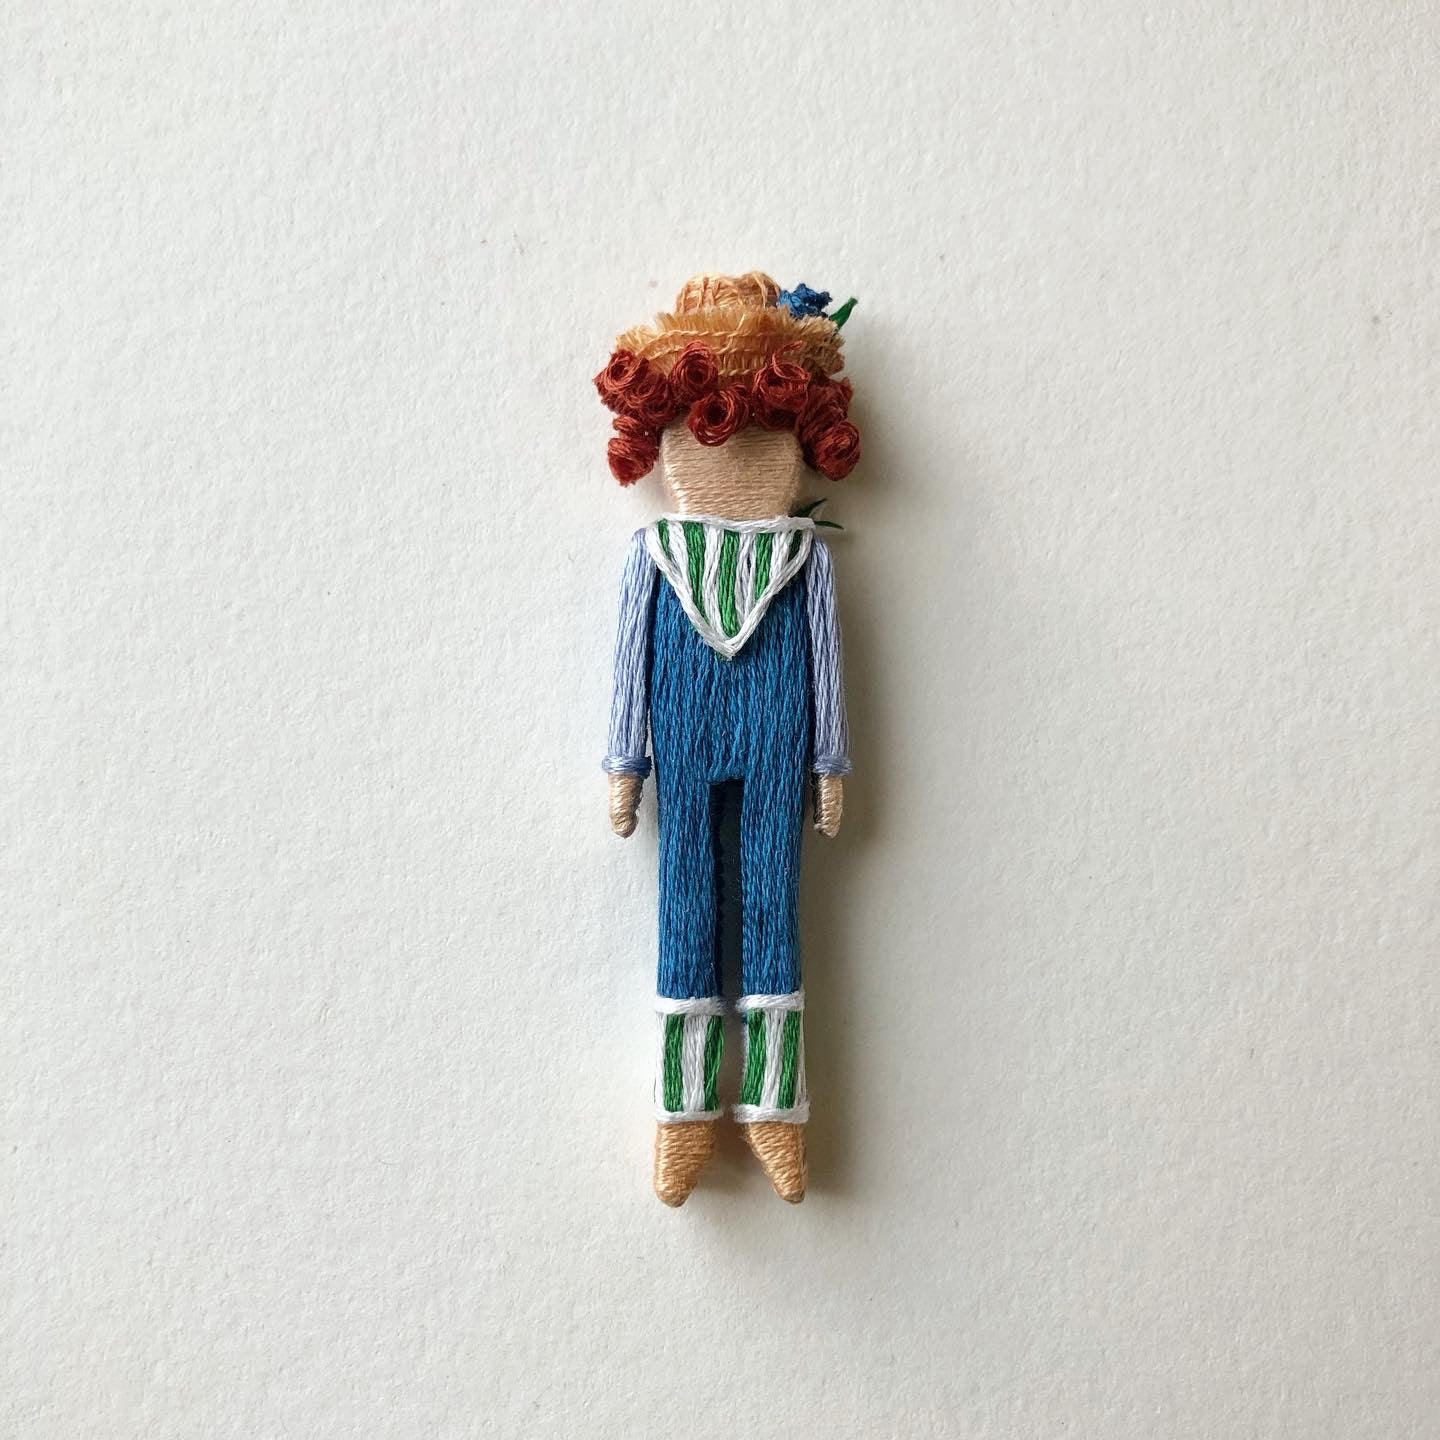 Clothespin Worry Dolls